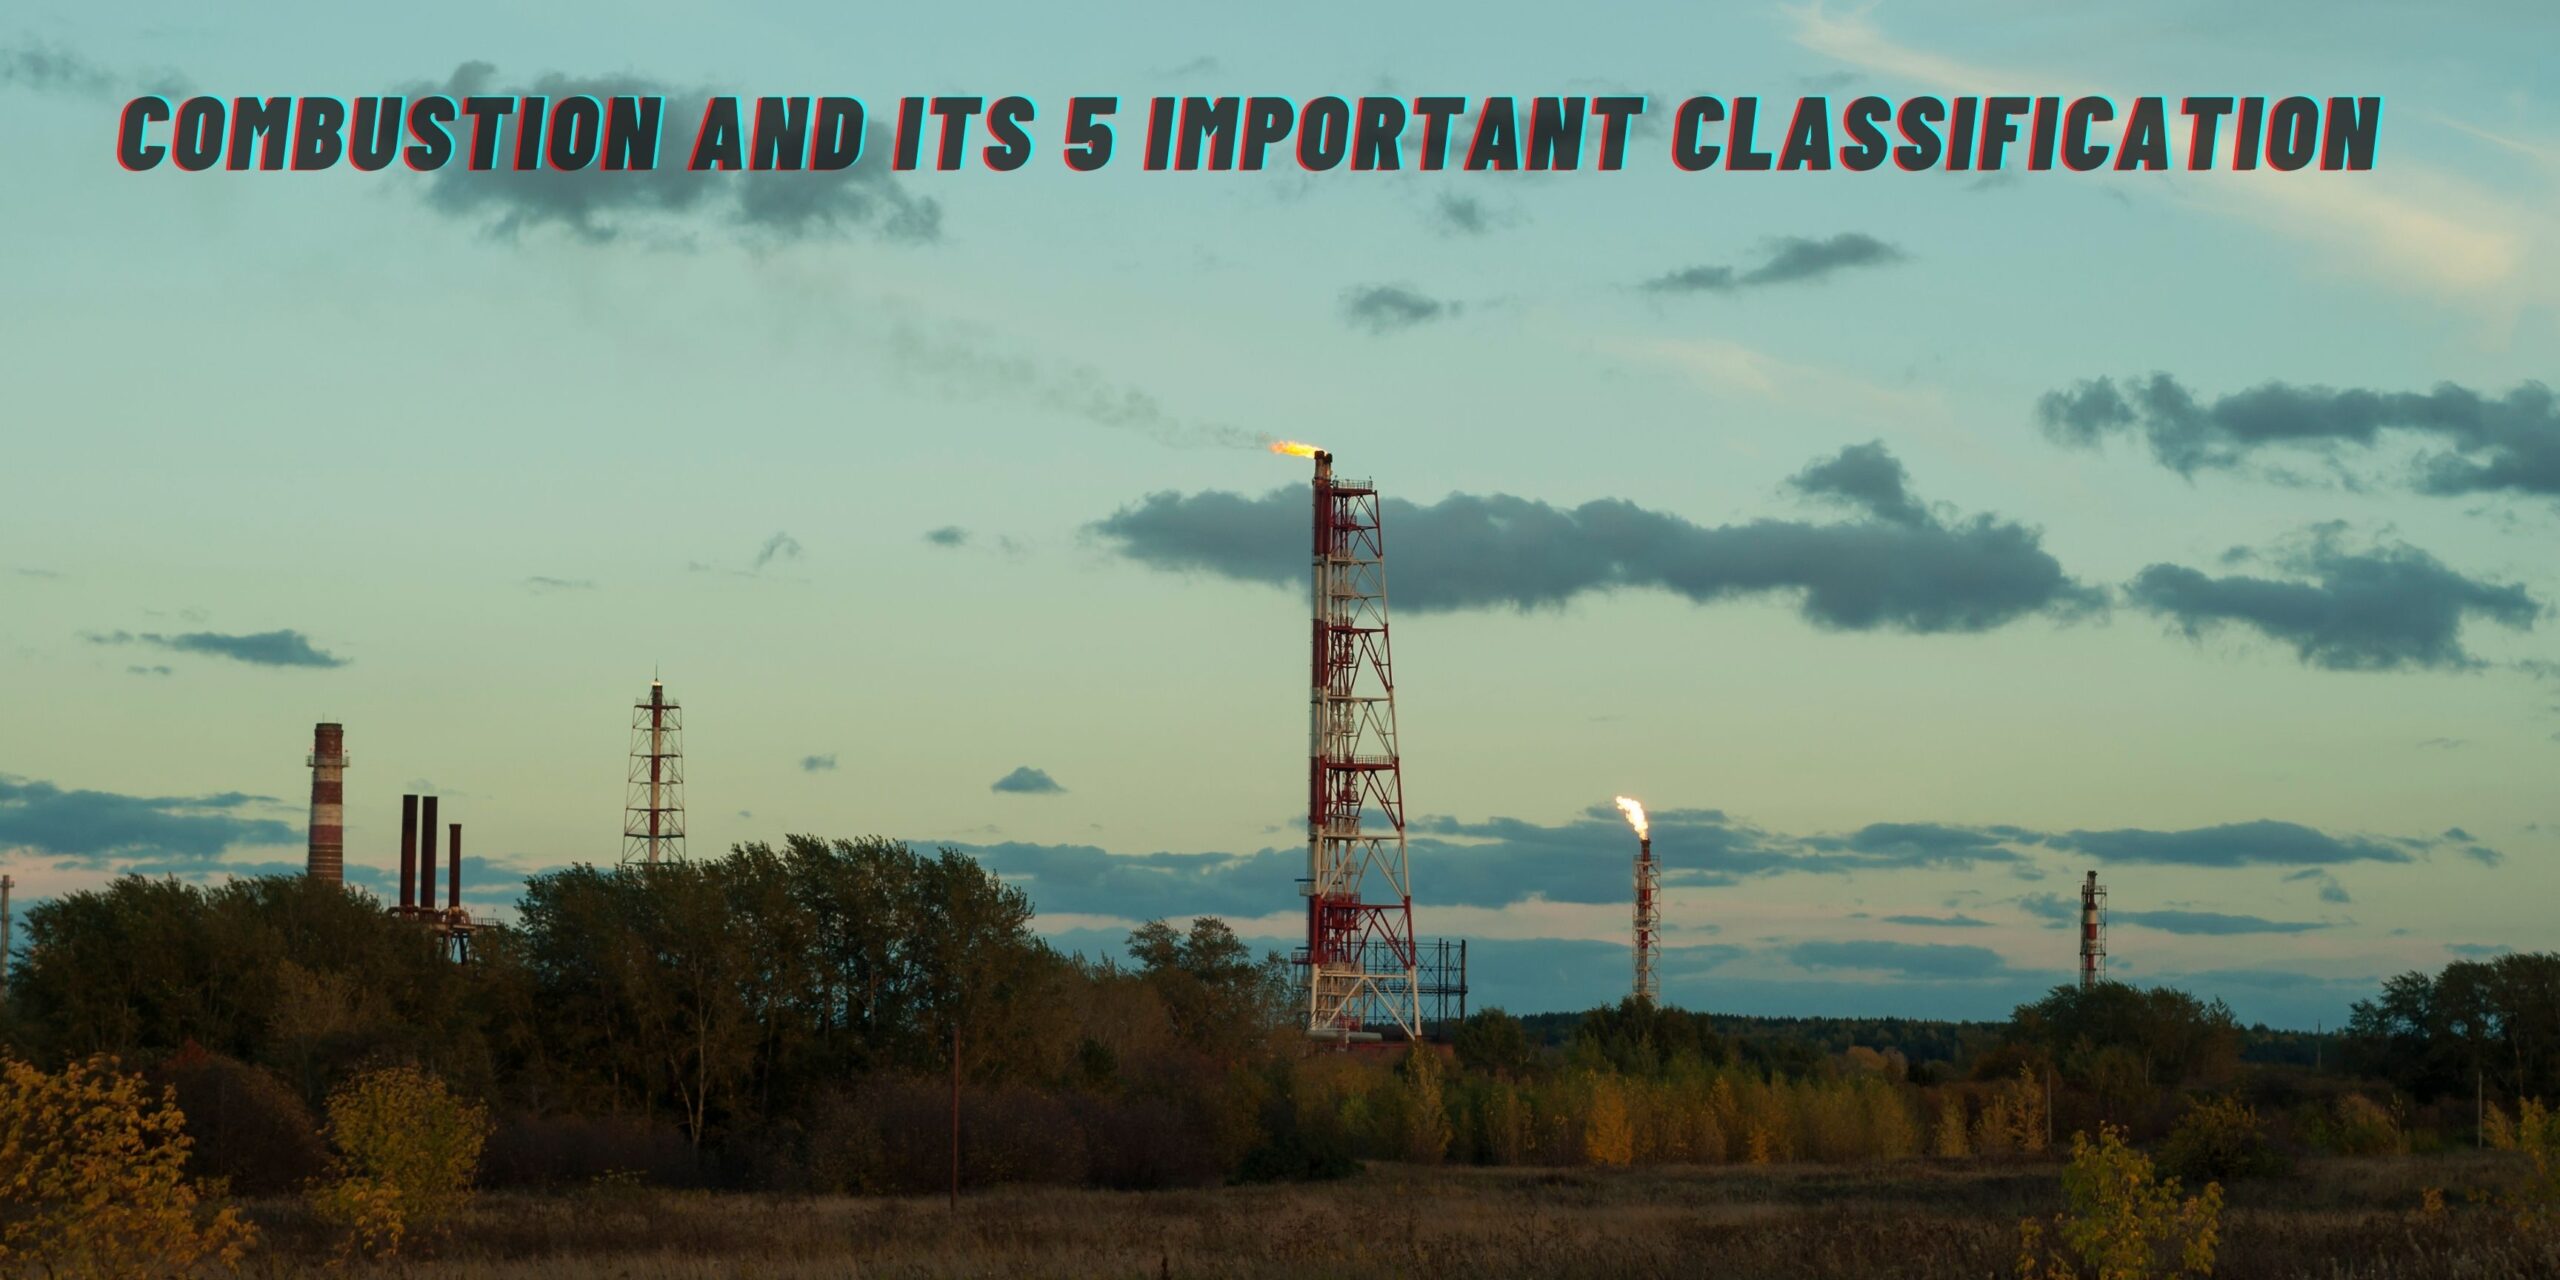 Combustion and its 5 important classification